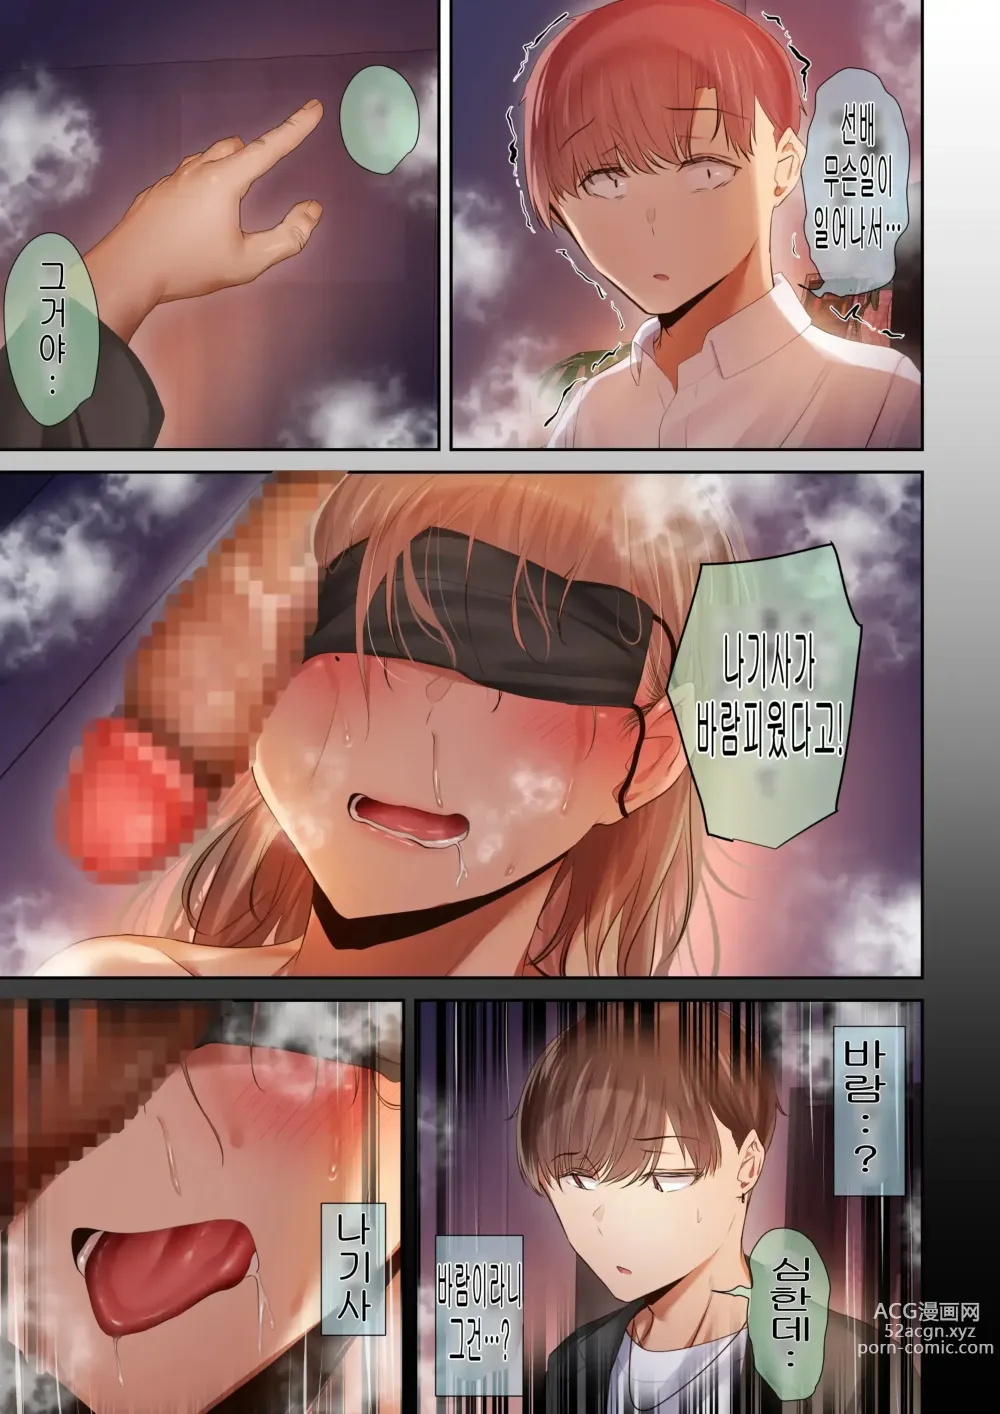 Page 97 of doujinshi A story about my favorite senior, who can be trusted, is made into a female by Yarichin. 의지할수 있는 선배가 야한친구에 의해 암컷이된 이야기